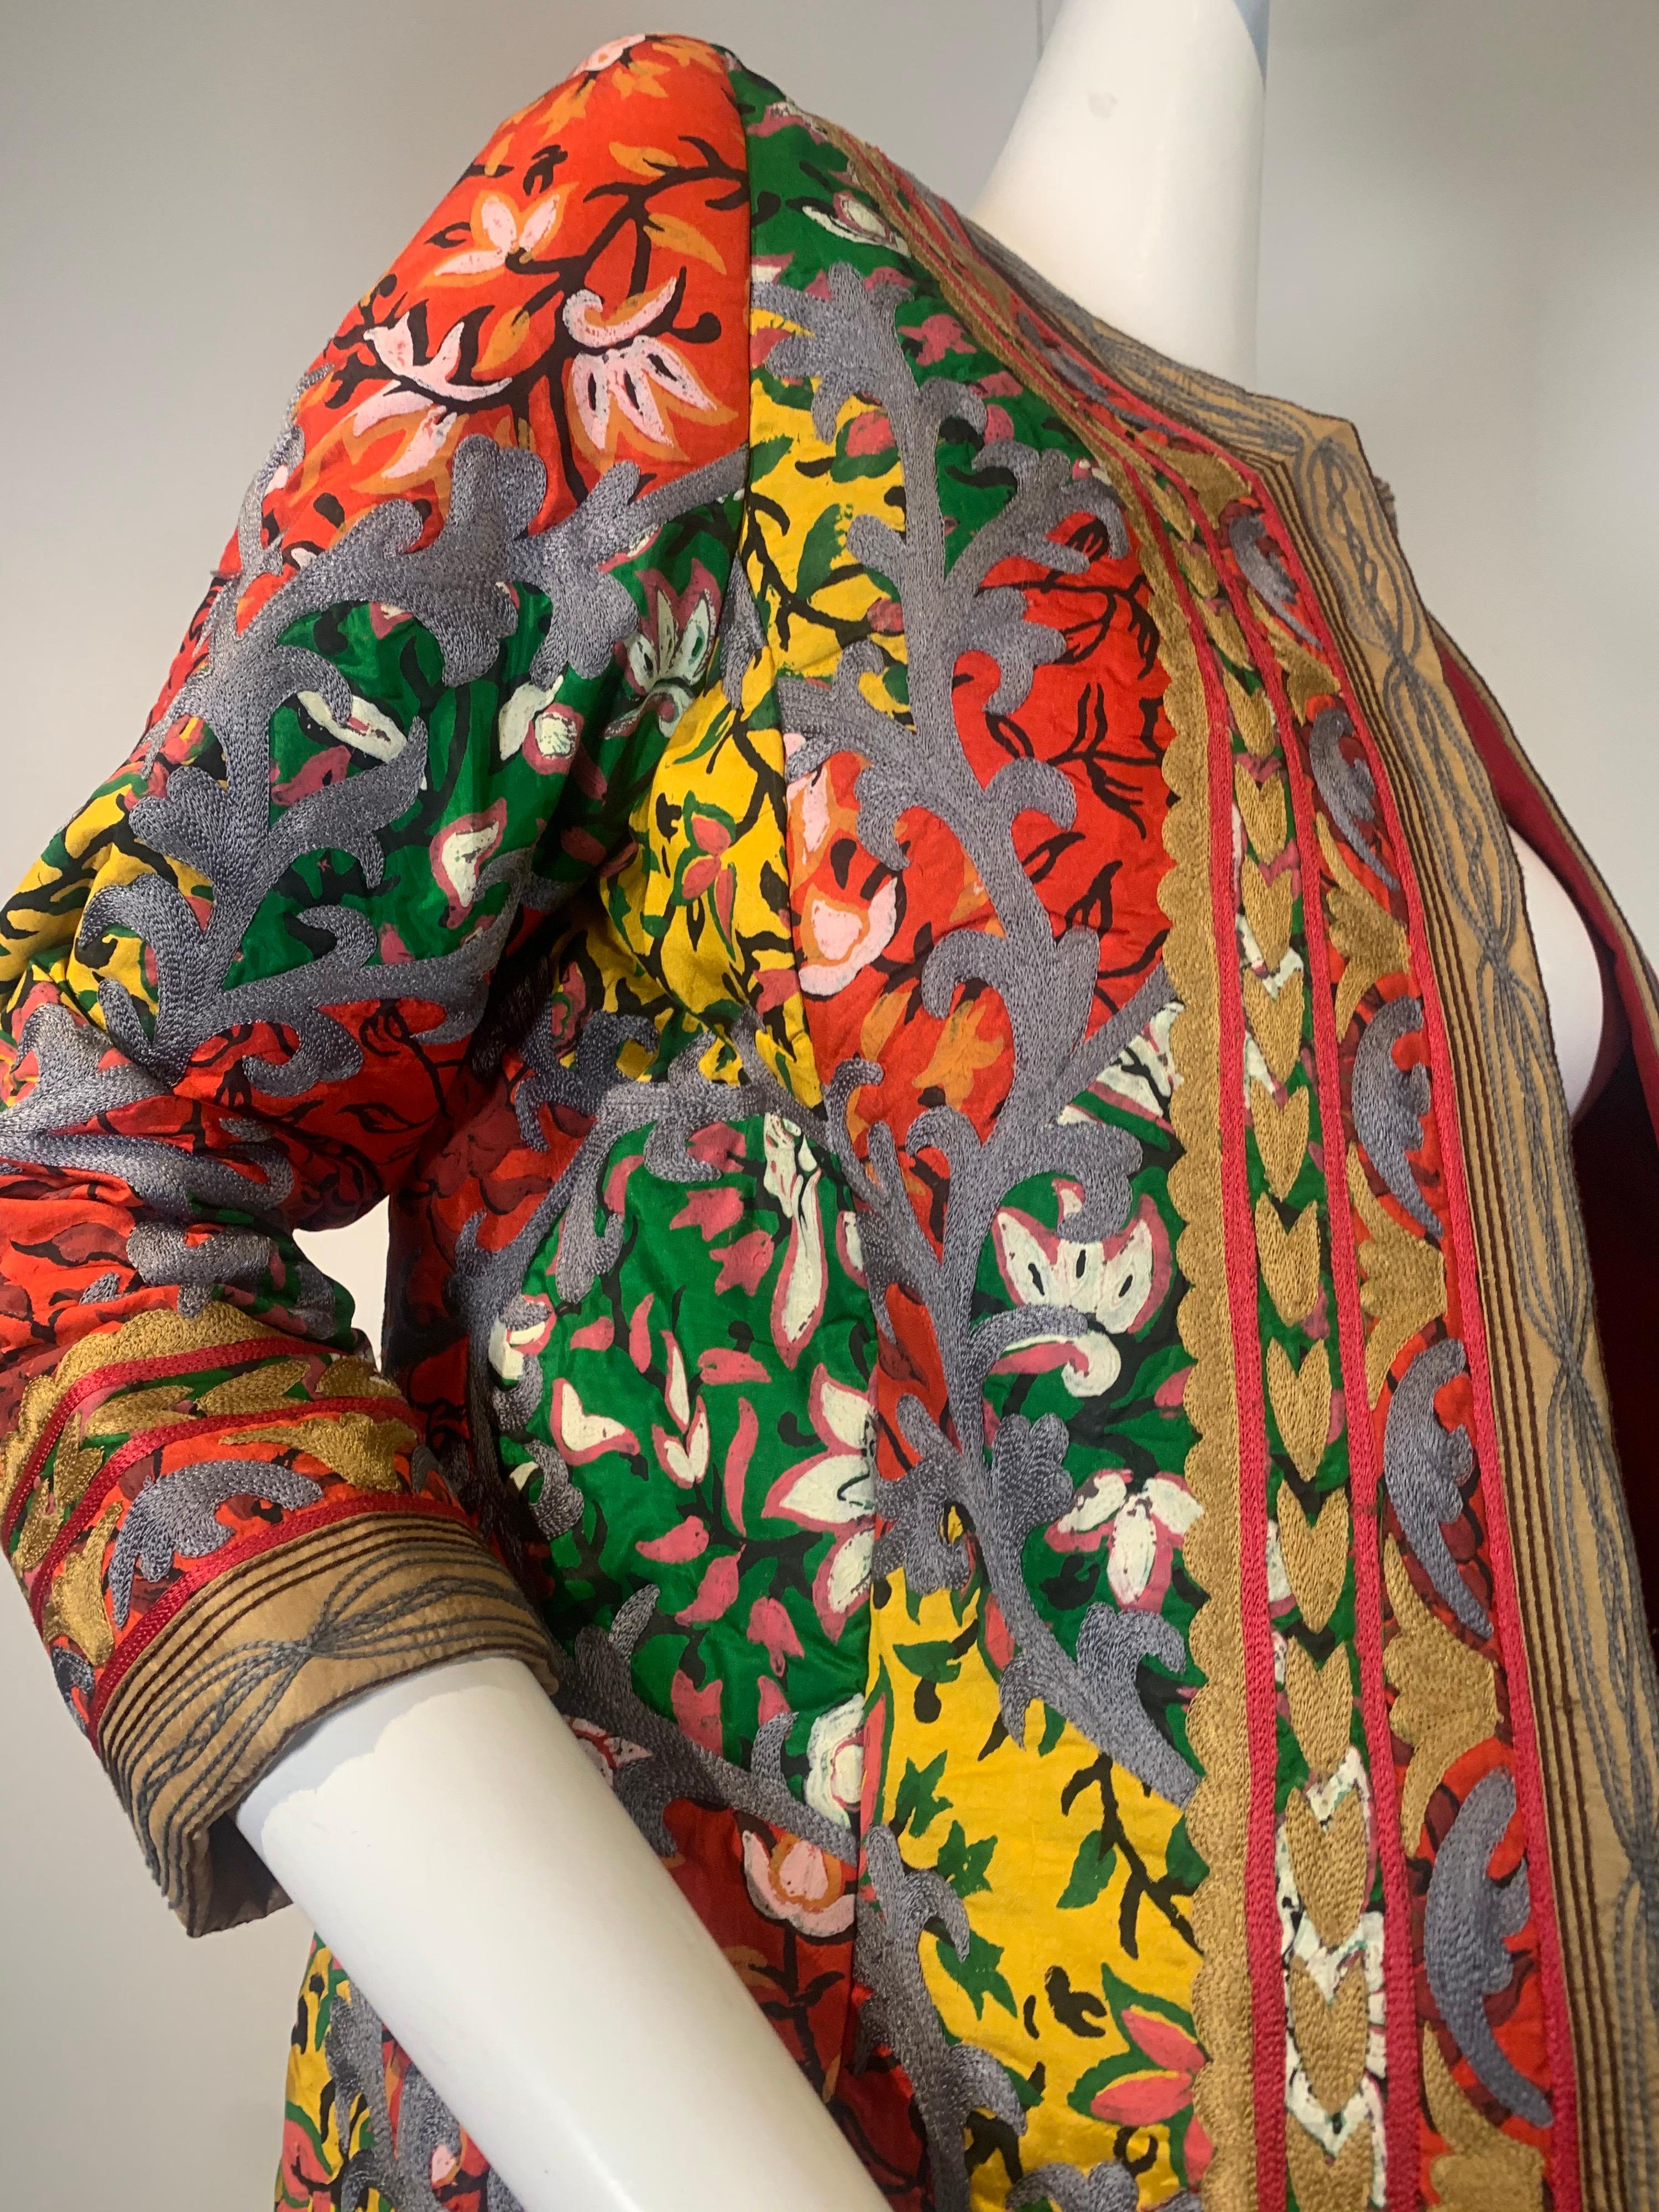 2000s Oscar de la Renta Turkish-styled coat: Silk embroidery over a silk stylized floral with gold embroidered trim. Fully lined. Size 8. No closures or collar. Worn open. 